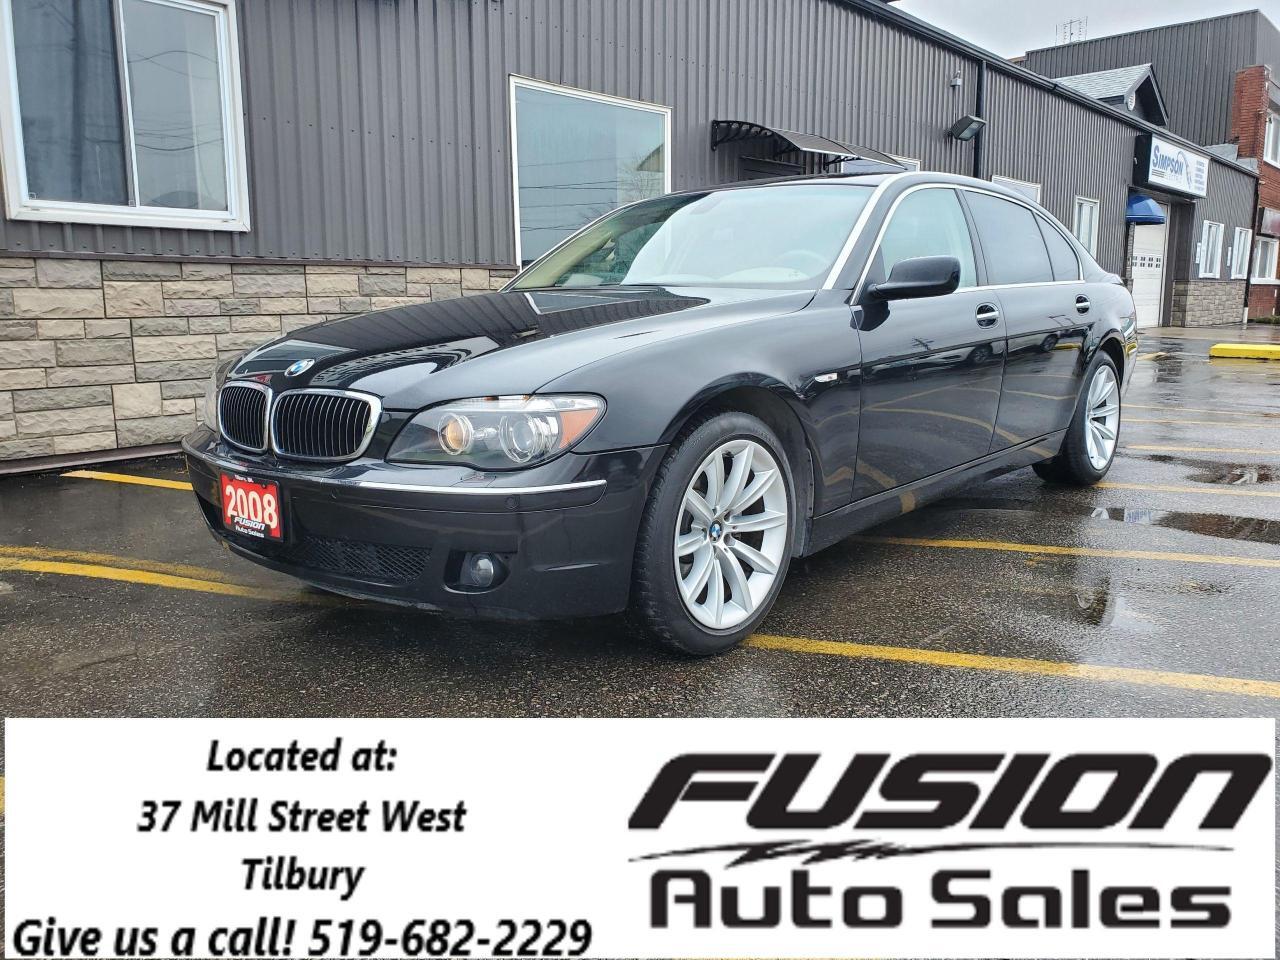 2008 BMW 7 Series 750Li-NO HST TO A MAX OF $2000 LTD TIME ONLY